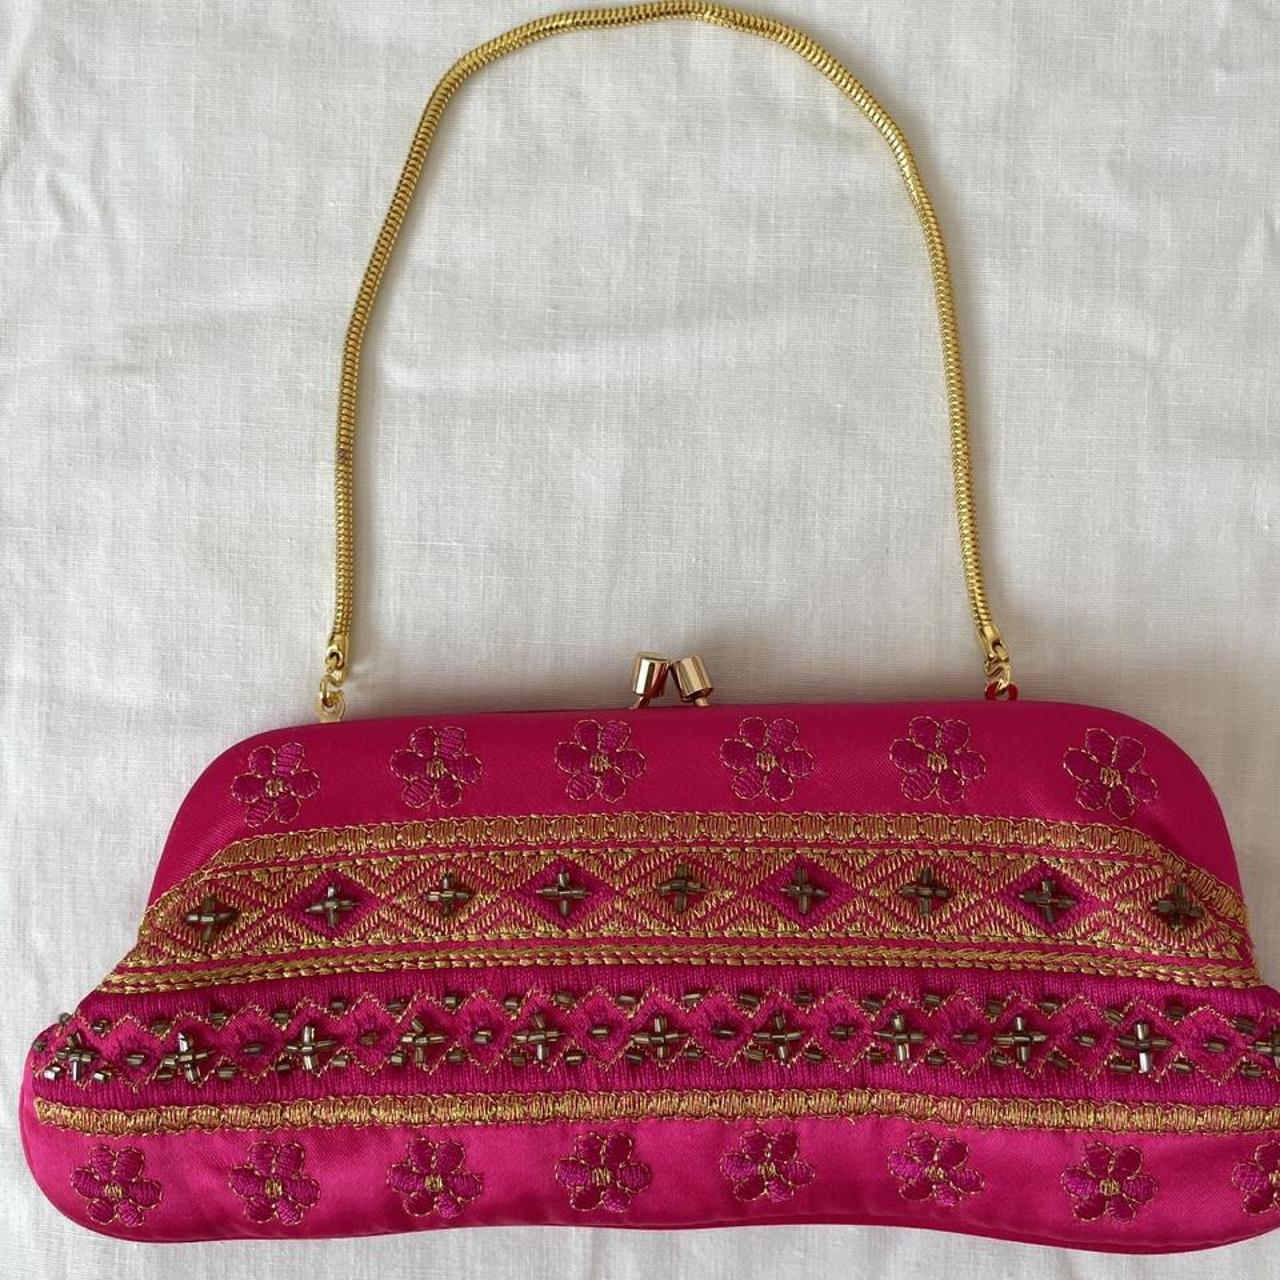 Product Image 1 - Embroidered hot pink satin clutch